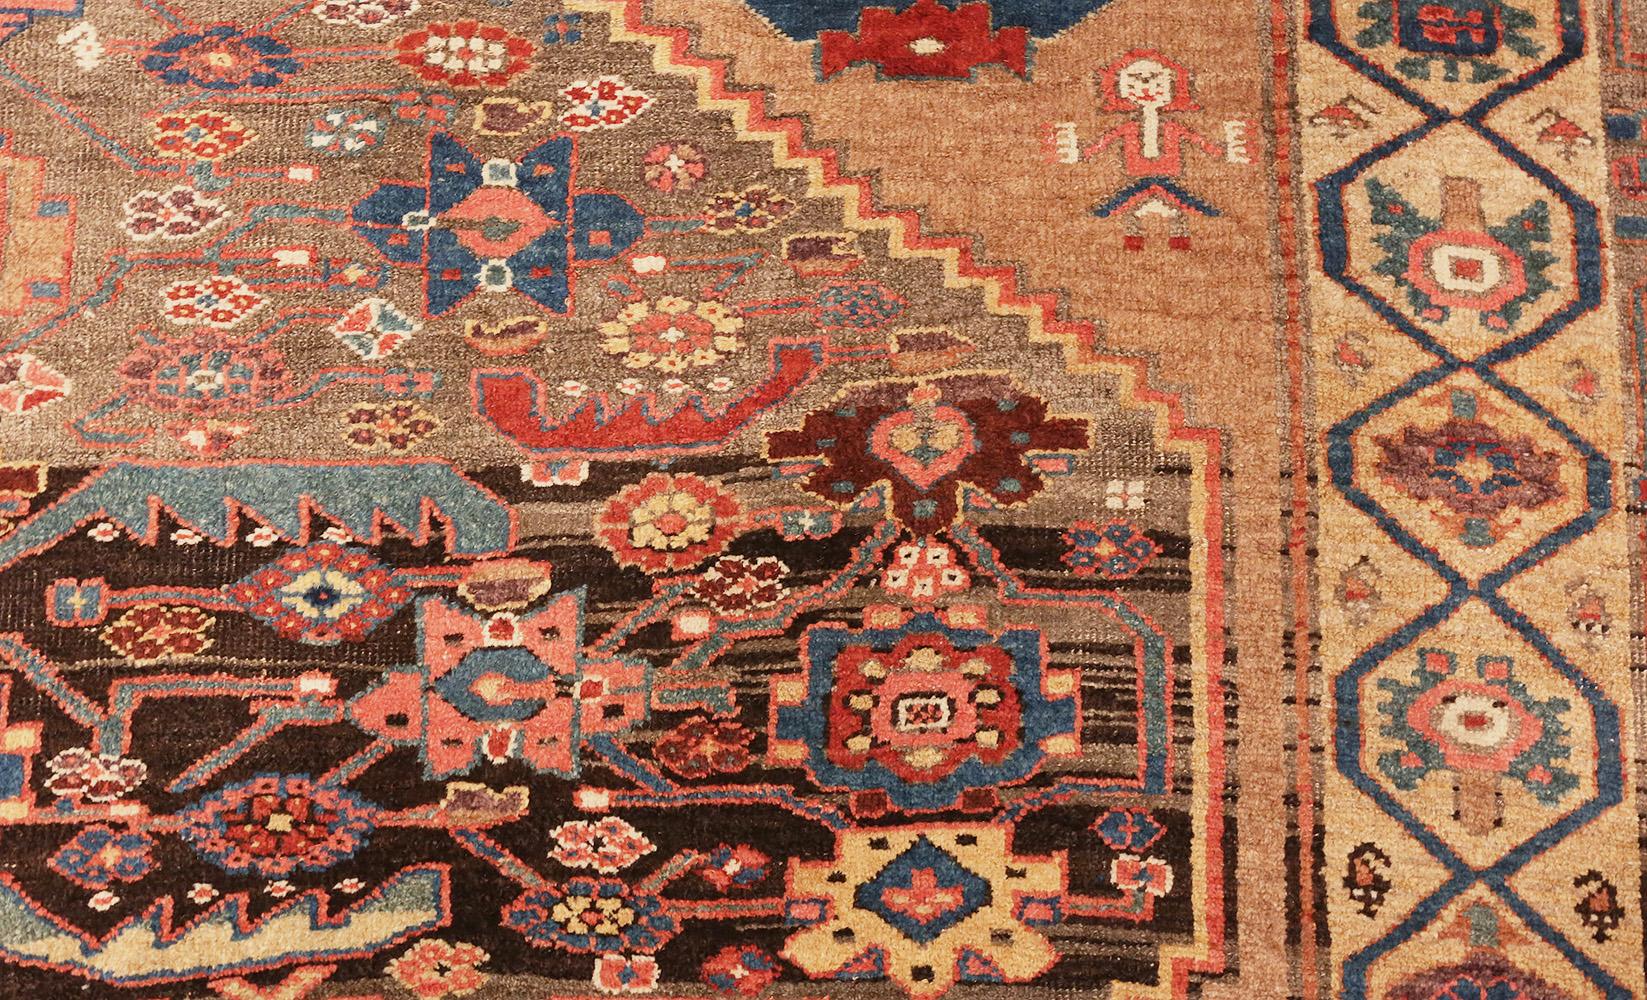 Tribal and Collectible Antique Persian Bidjar Sampler Rug, Country of Origin: Persia, Circa Date: Late 19th Century. Size: 4 ft x 6 ft 7 in (1.22 m x 2.01 m)

This antique Persian Bidjar is one of the rarest and most artistic sampler rugs and